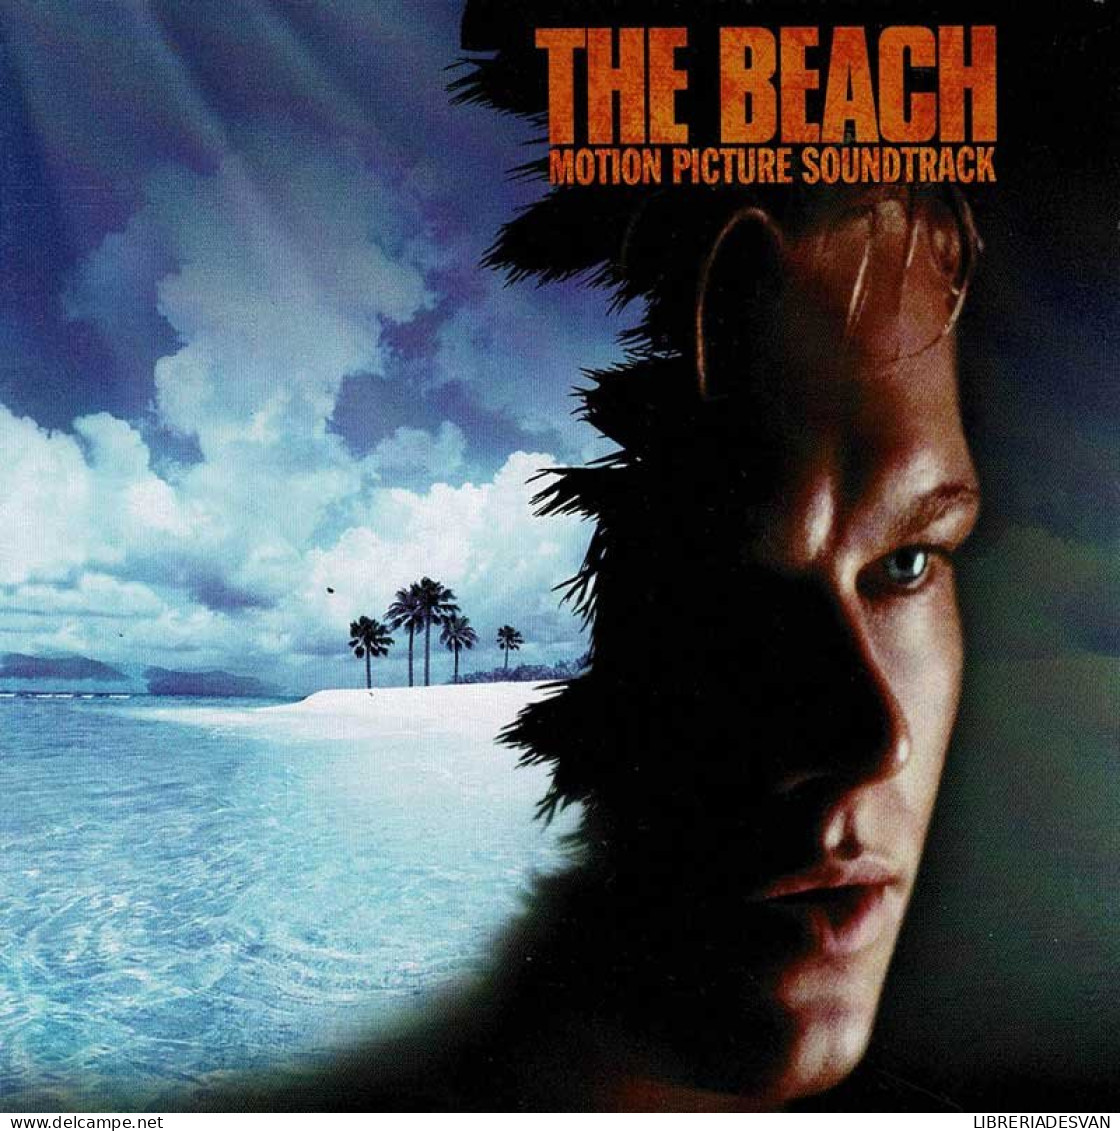 The Beach (Motion Picture Soundtrack). CD - Soundtracks, Film Music